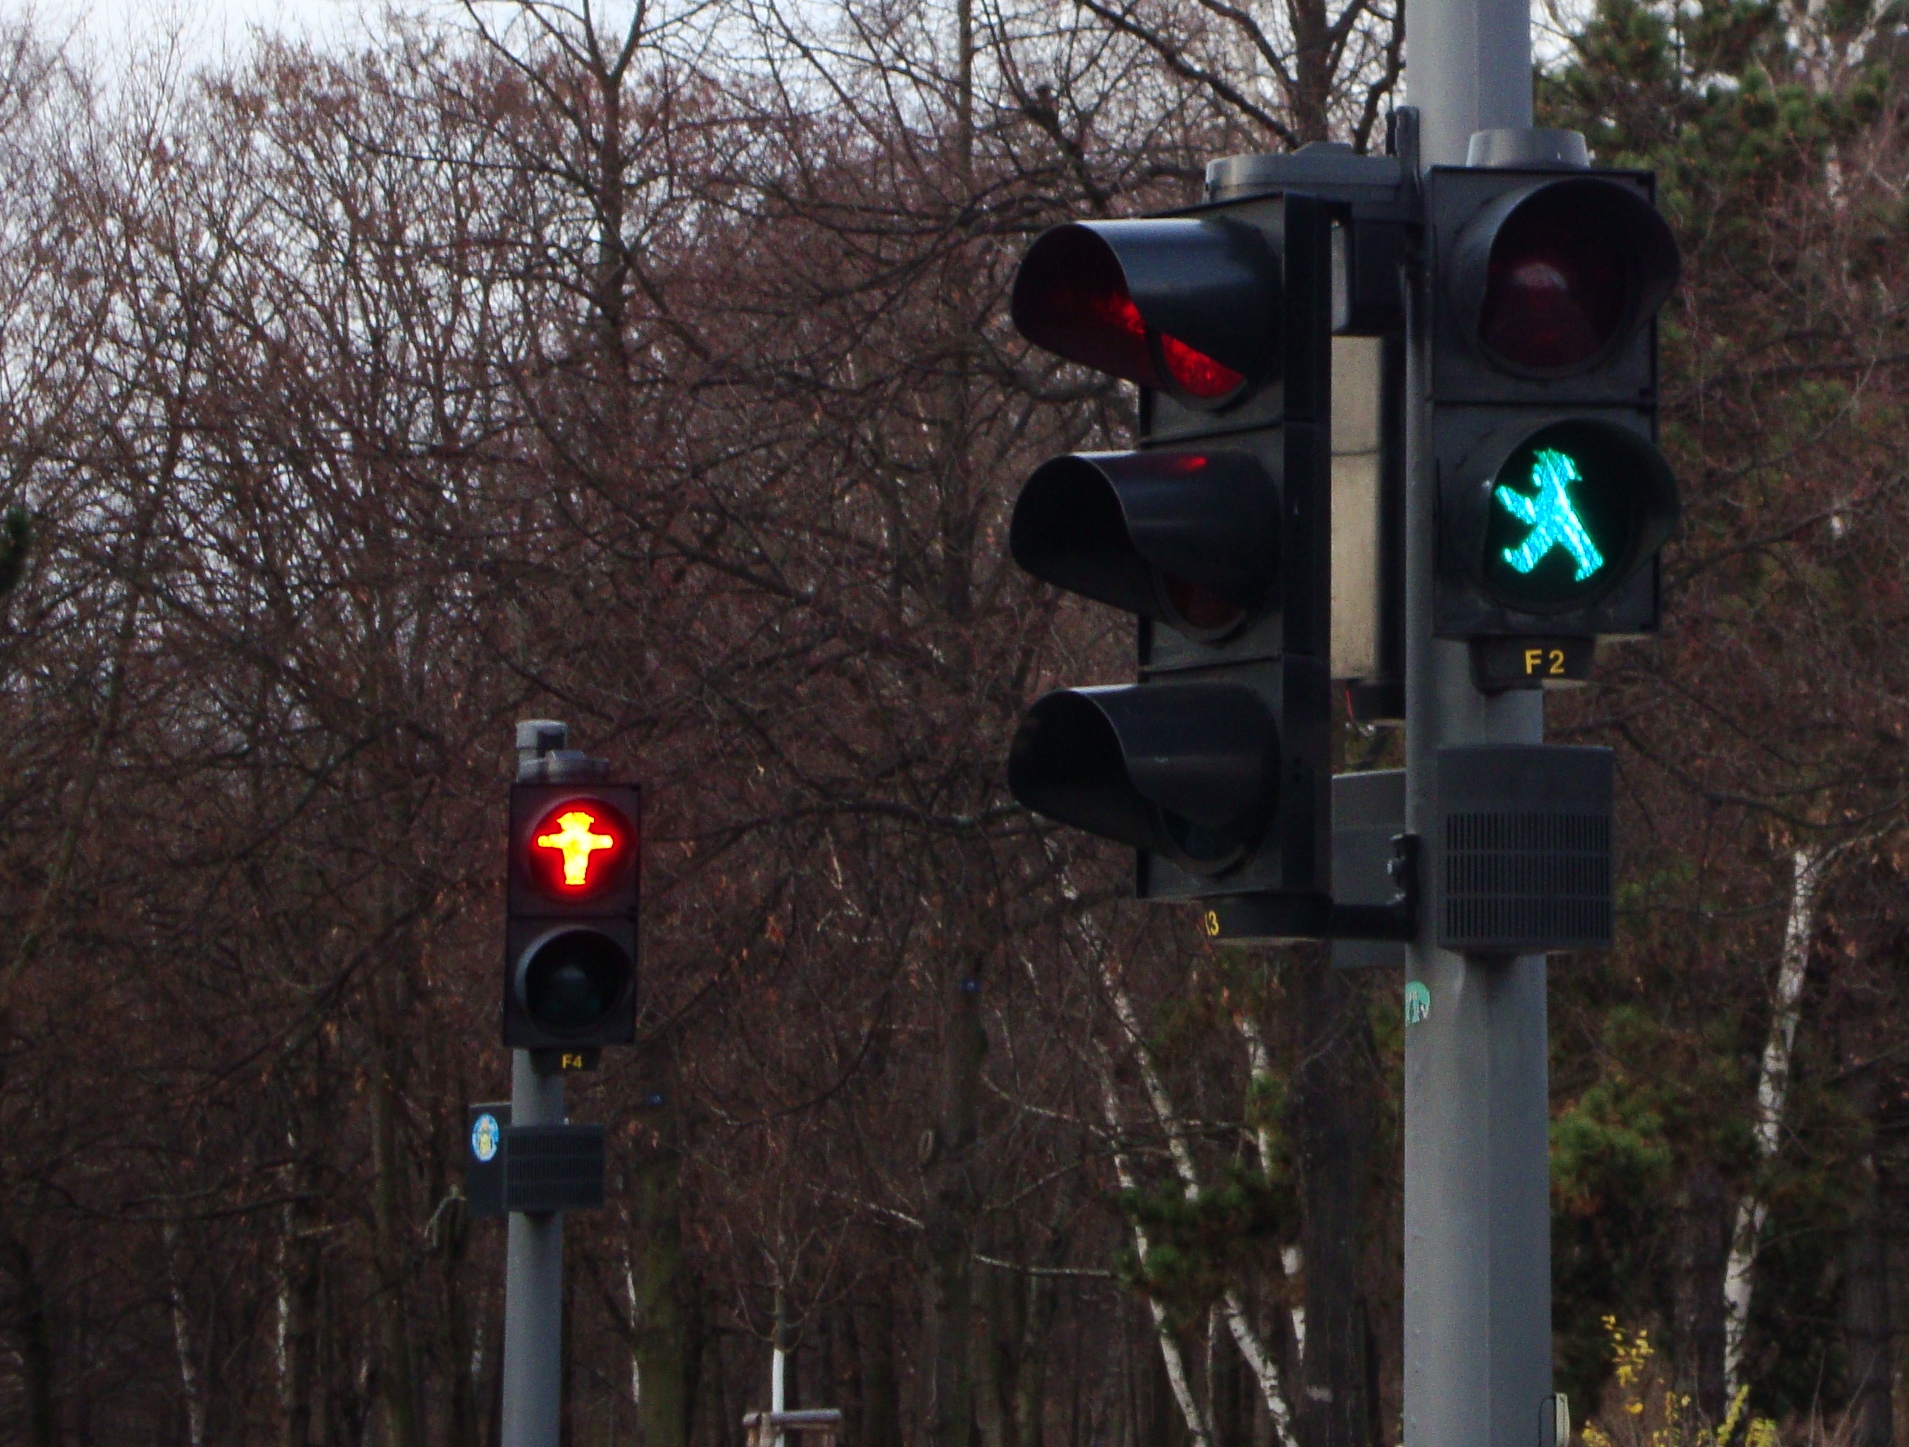 two traffic lights with green cross walk signal in foreground